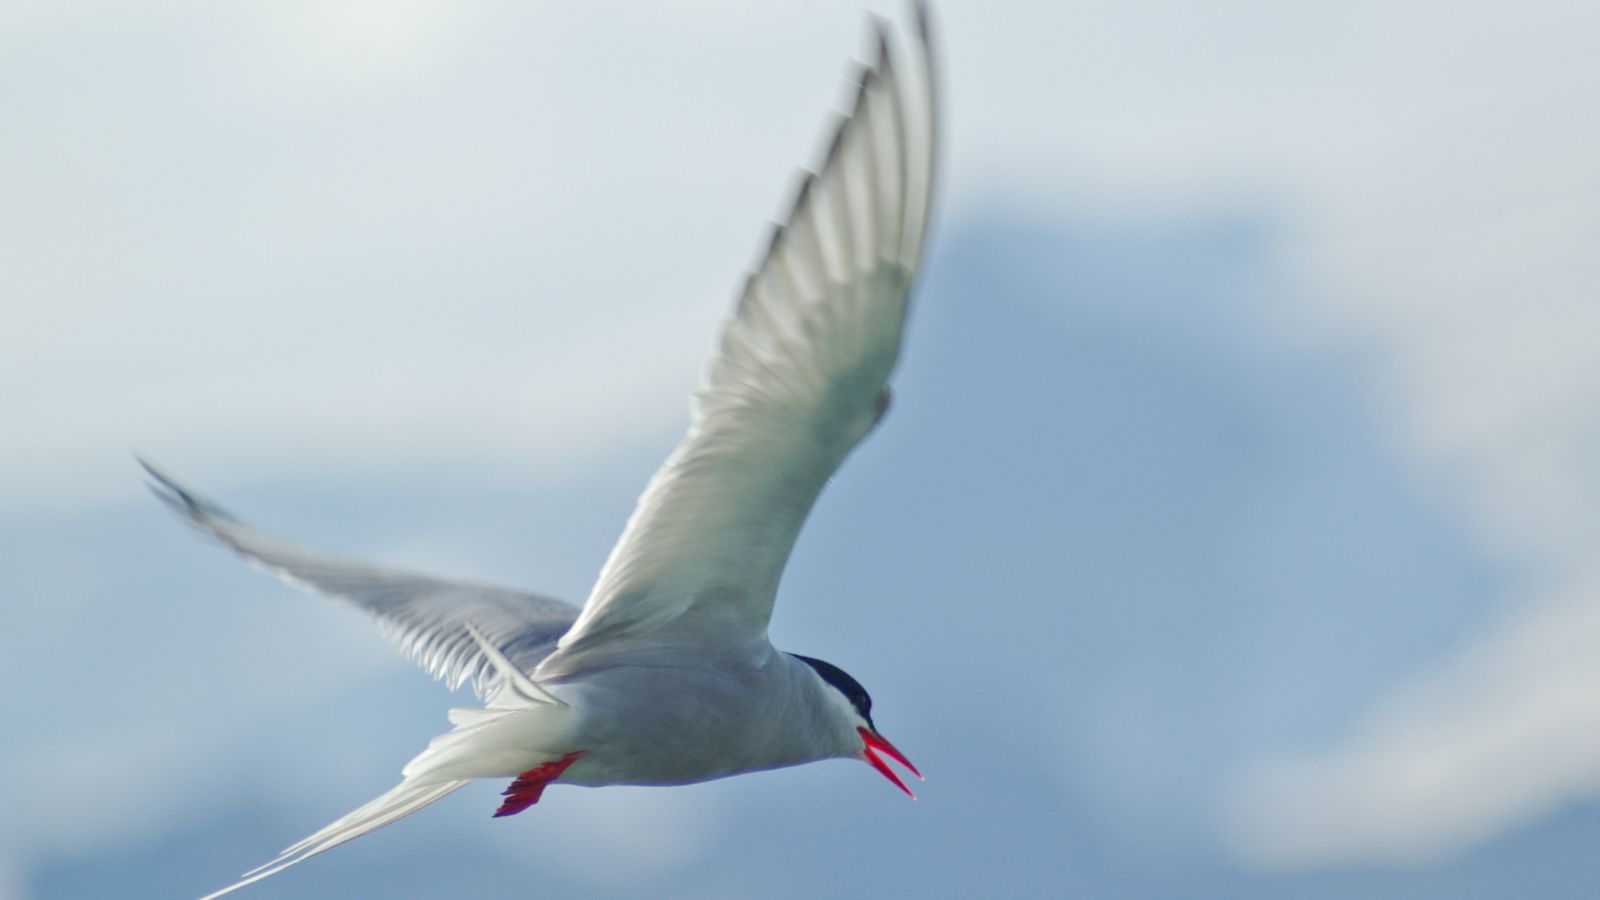 An Arctic Tern flying in the sky.